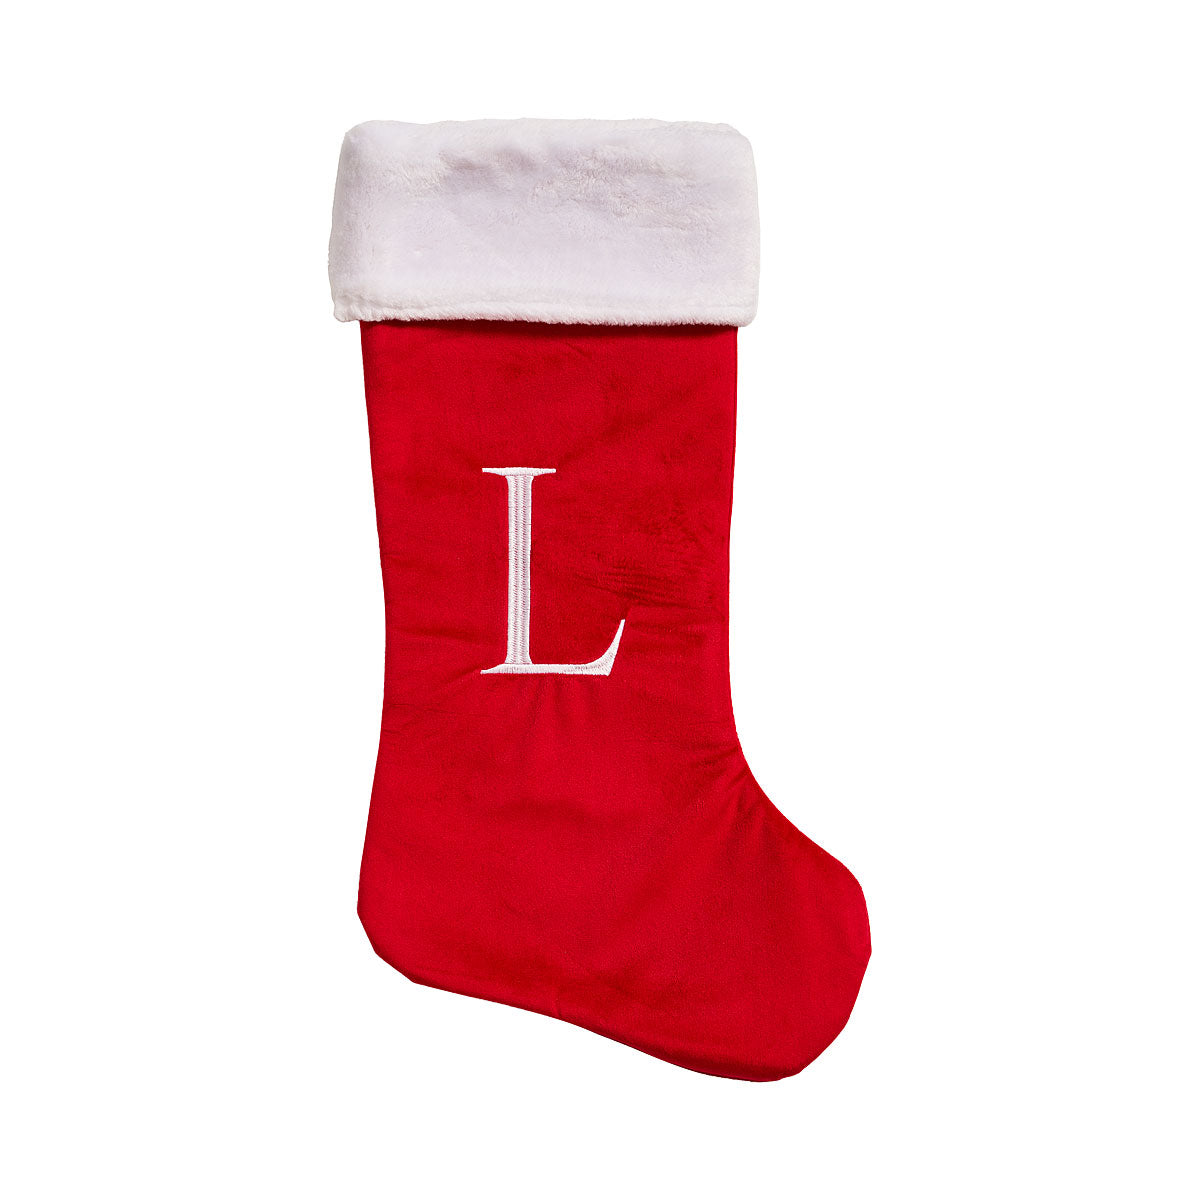 Monogram Stocking with Letter Assorted | The Reject Shop